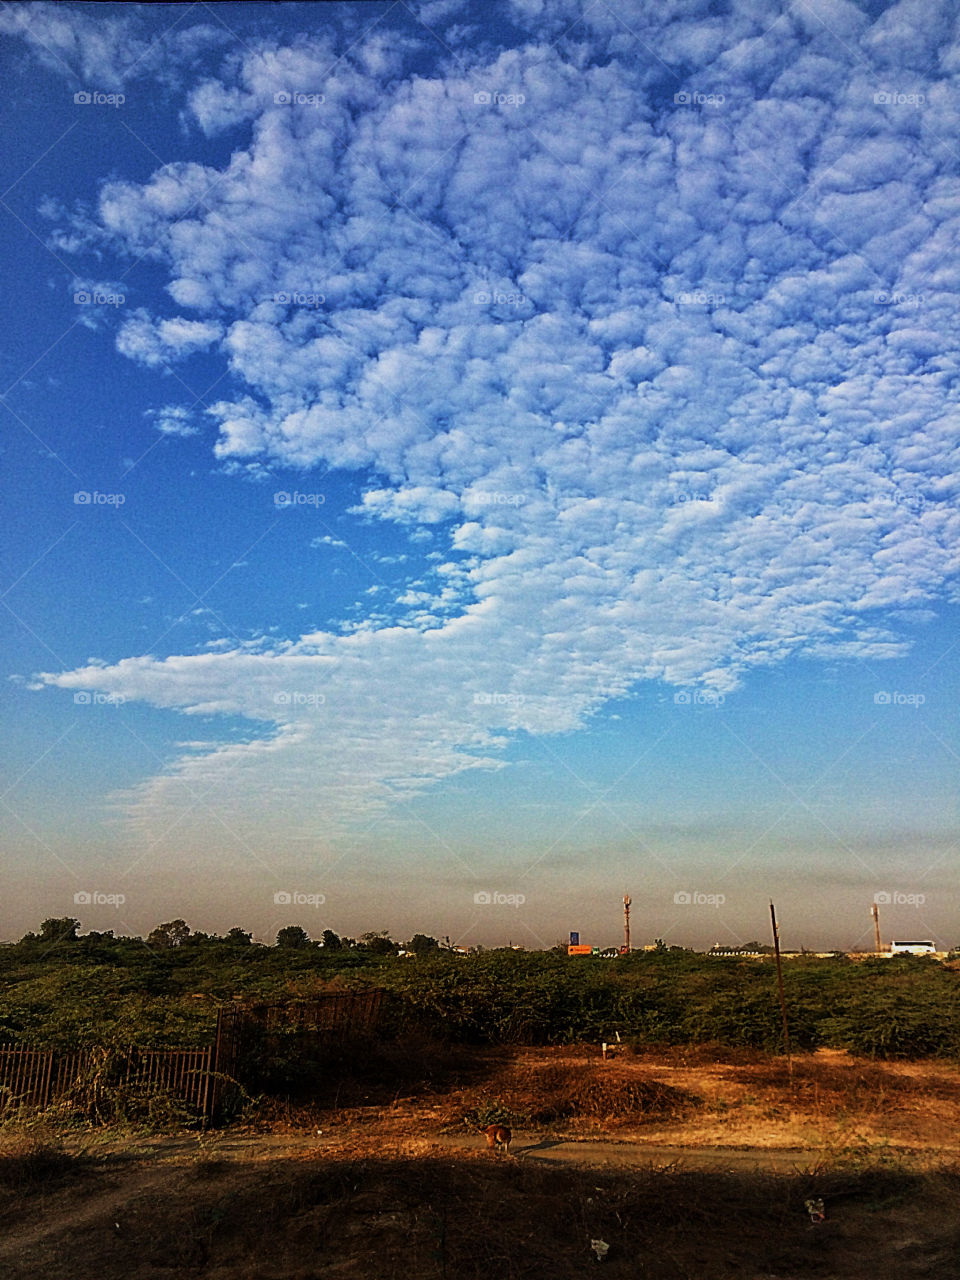 #photography #love #to #click #natural #photo #click #by #iphone5s #gujarat #sky #look #crazy #clouds #lovely #nature